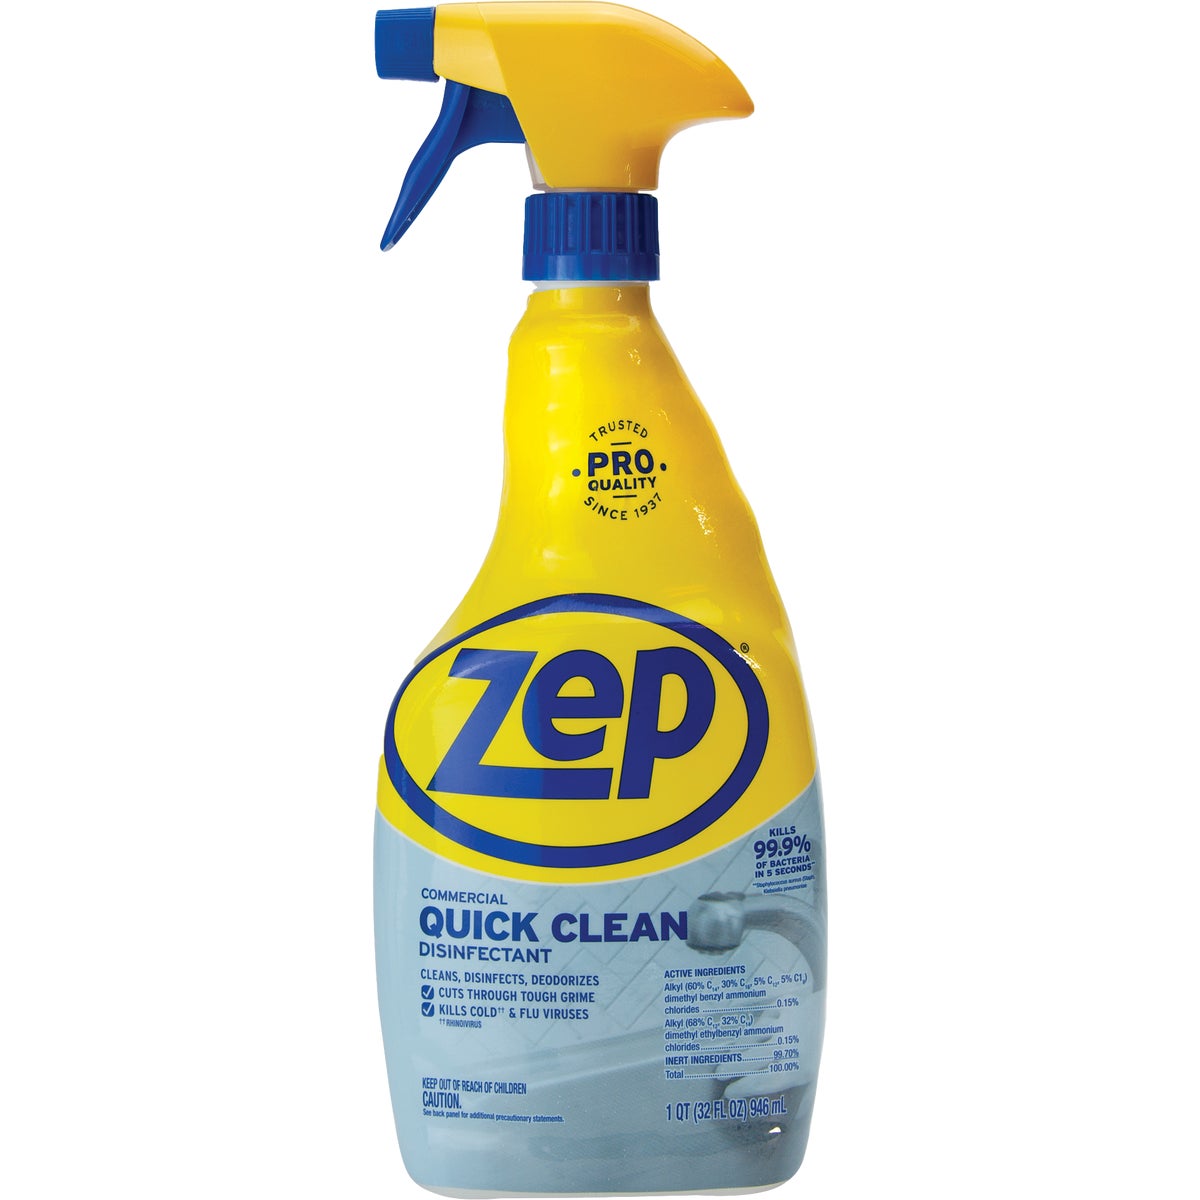 Zep Commercial 32 Oz. Quick Clean Disinfectant Cleaner